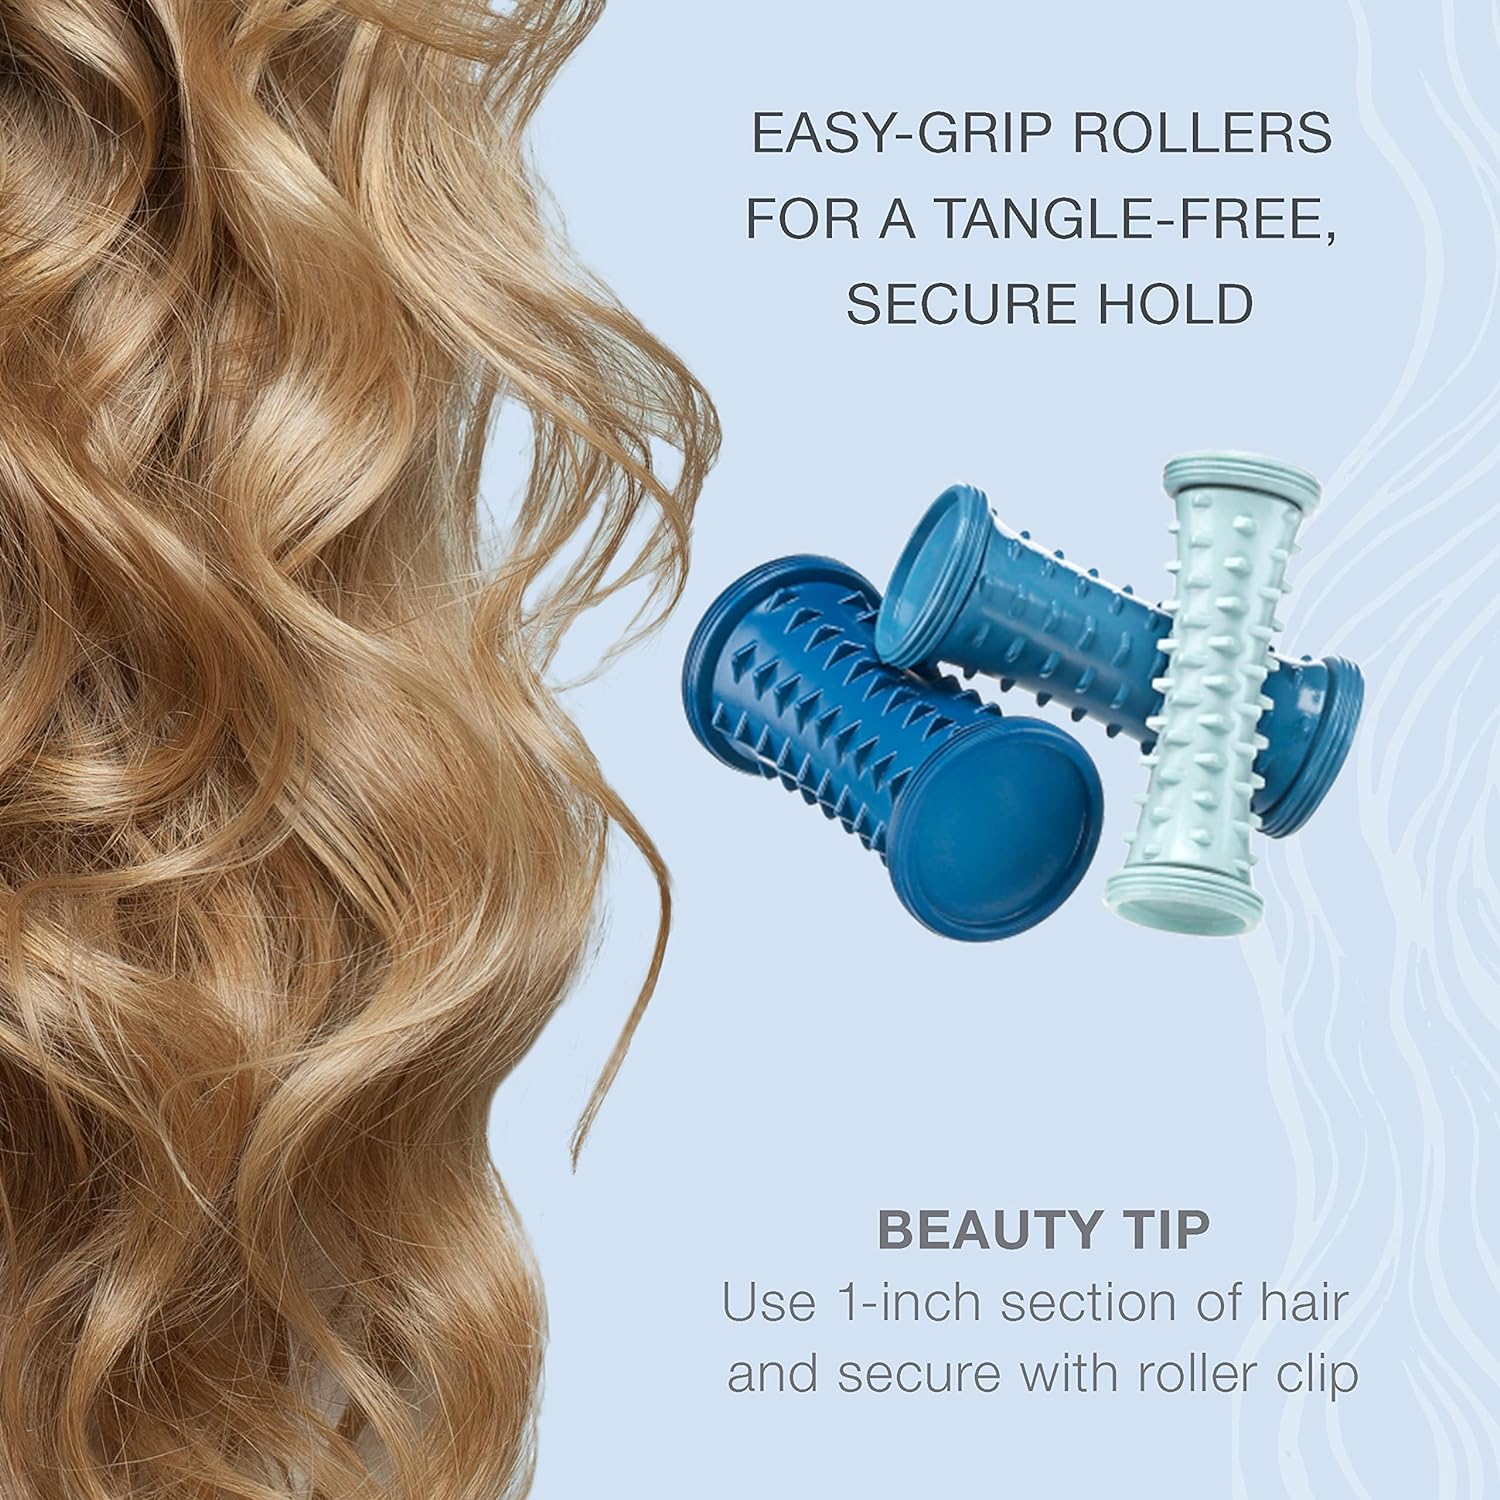 Conair Compact Multi-Size Hot Rollers Reviews